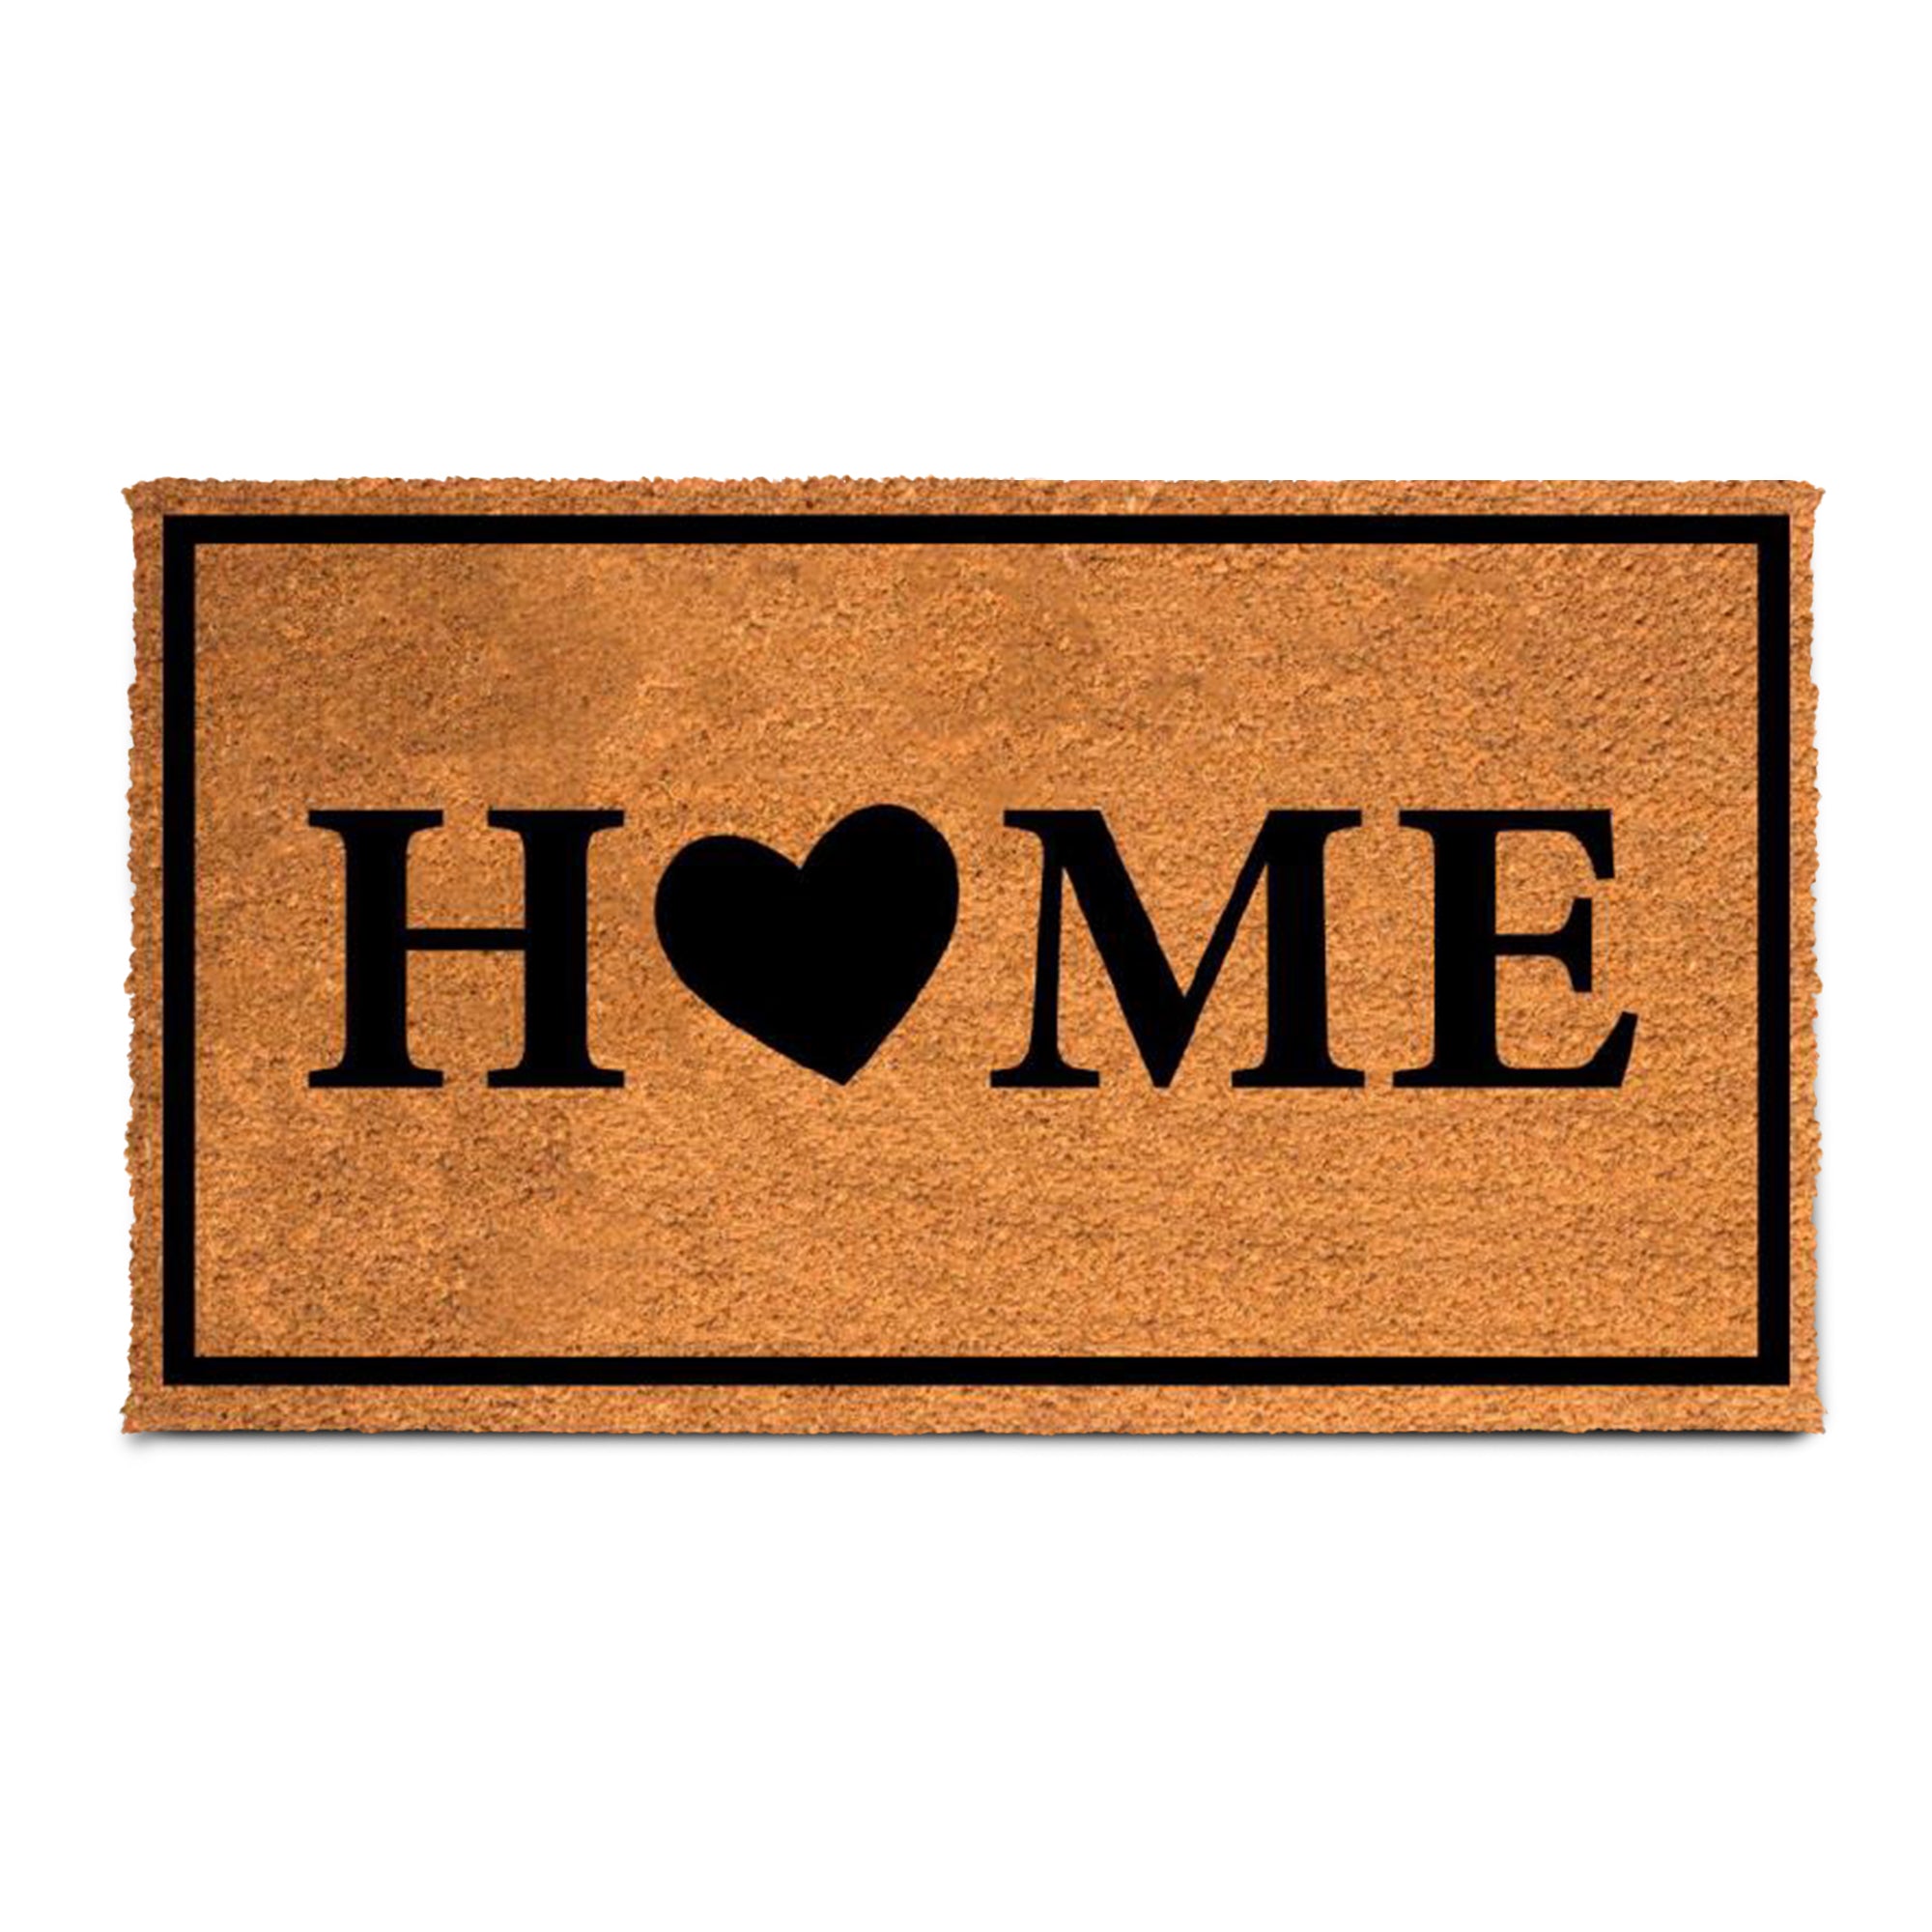 PLUS Haven Coco Coir Door Mat with Heavy Duty Backing, Natural